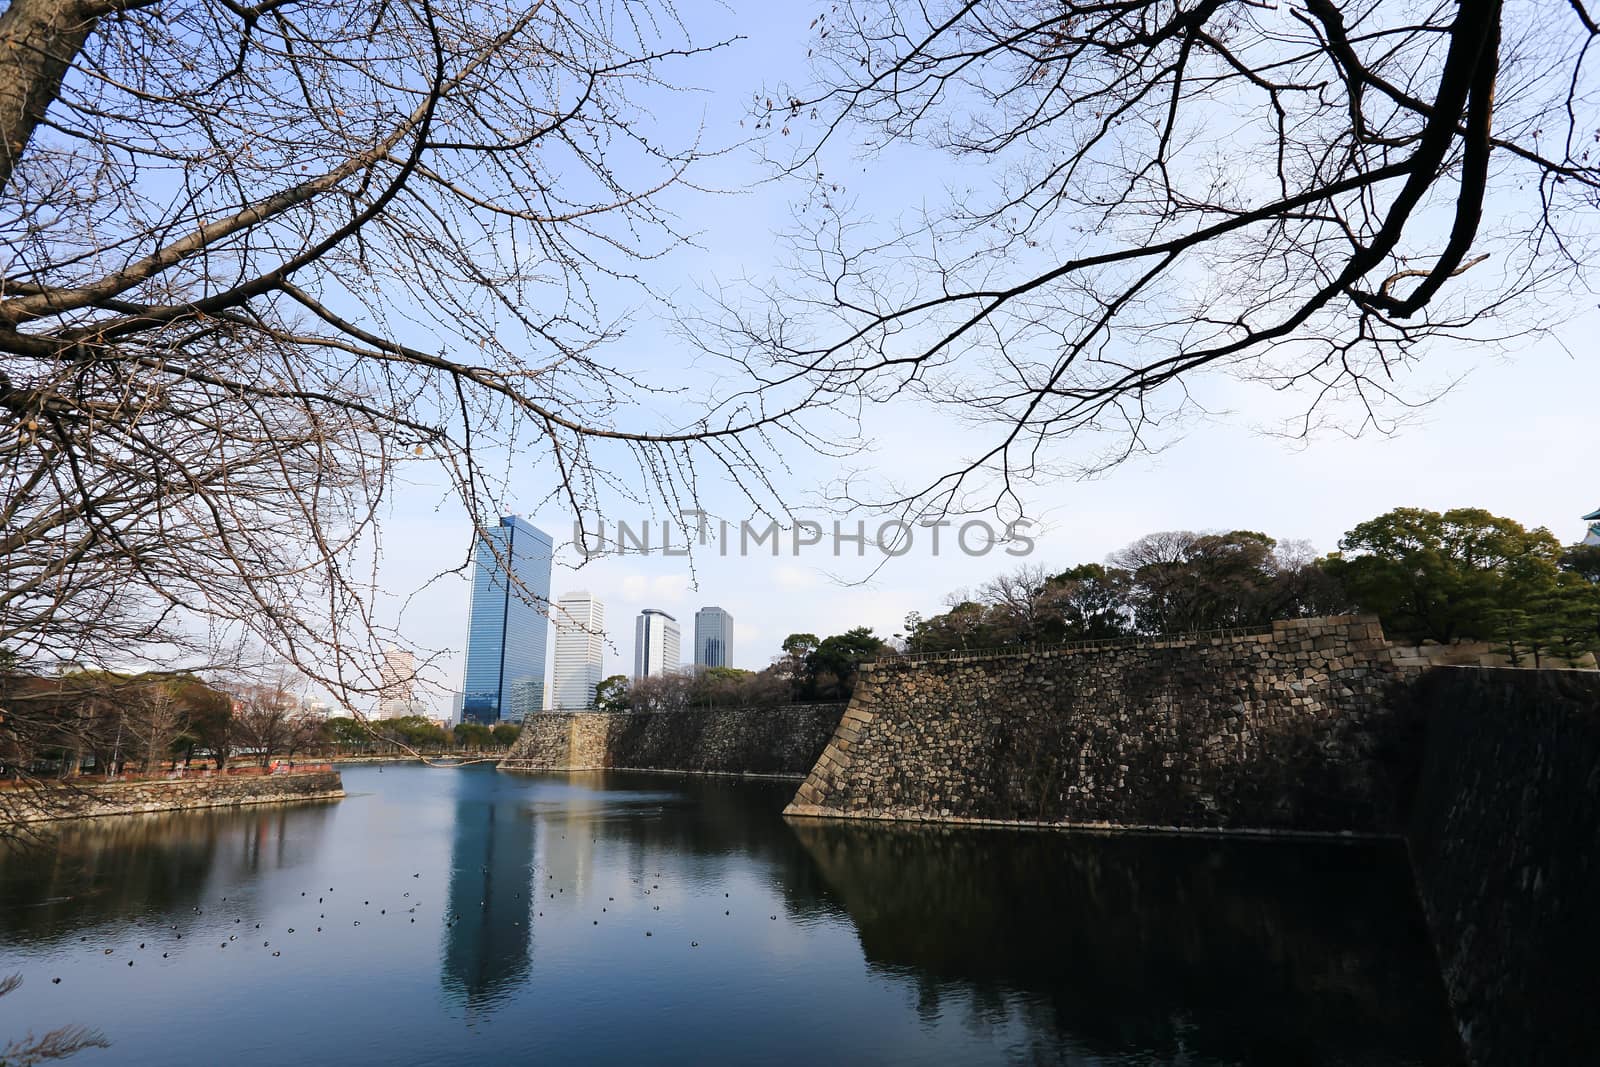 A moat surrounding Osaka castle in Japan, winter by rufous